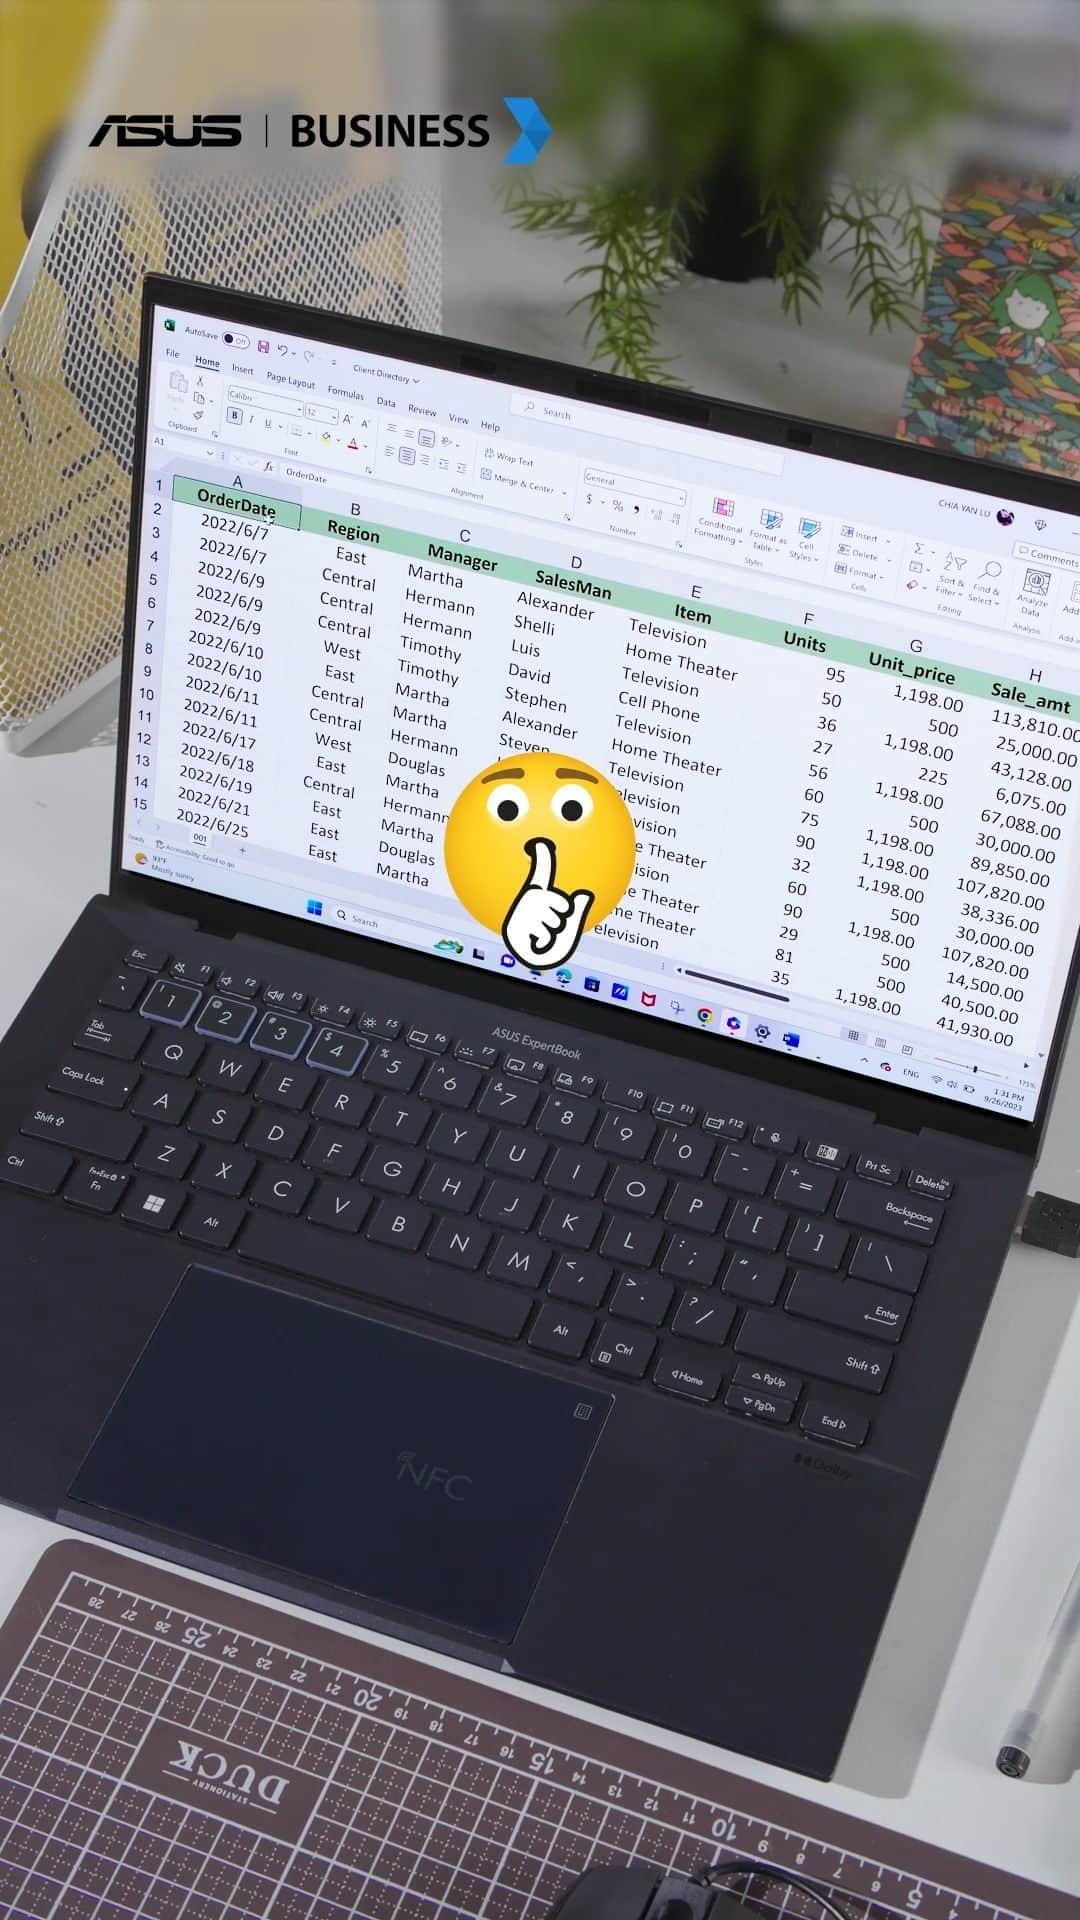 ASUSのインスタグラム：「When your boss asks you to encrypt those confidential documents... here’s what you should do!   Work smart with ASUS Business!  #ASUS #ASUSBusiness #UpgradeToIncredible #ExpertBook」